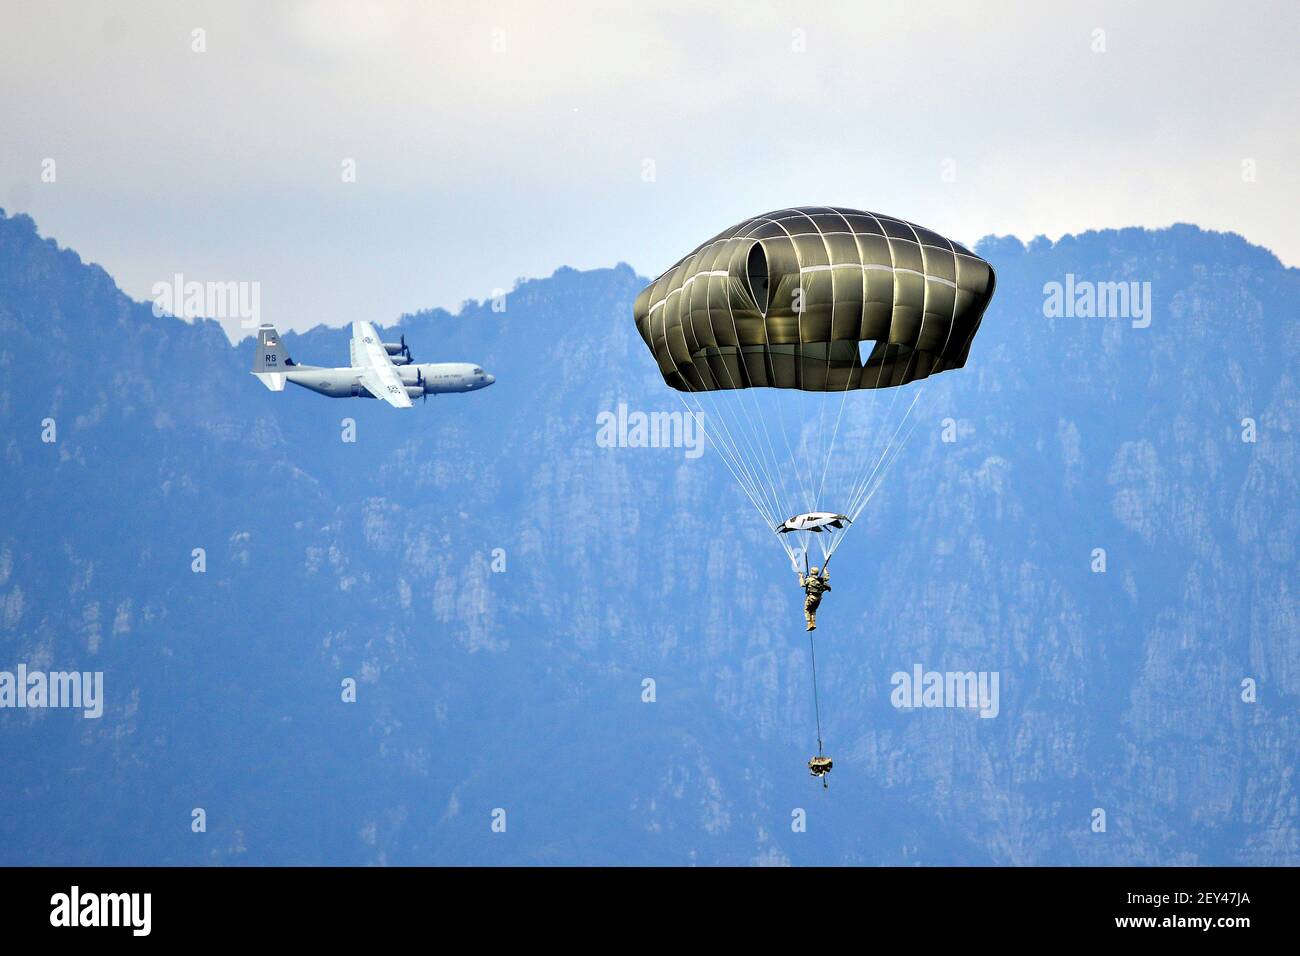 Paratroopers from 173rd Brigade Support Battalion, 173rd Airborne Brigade land after a jump at Juliet Drop Zone in Pordenone, Italy, Sept. 24. The U.S. Army Paratroopers conducting an airborne operation with T-11 parachutes from C-130 Hercules Aircraft of the 86th Airlift Wing is stationed at Ramstein Air Base, Germany. (Photo by Visual Information Specialist Paolo Bovo/U.S. Army/Sipa USA) Stock Photo